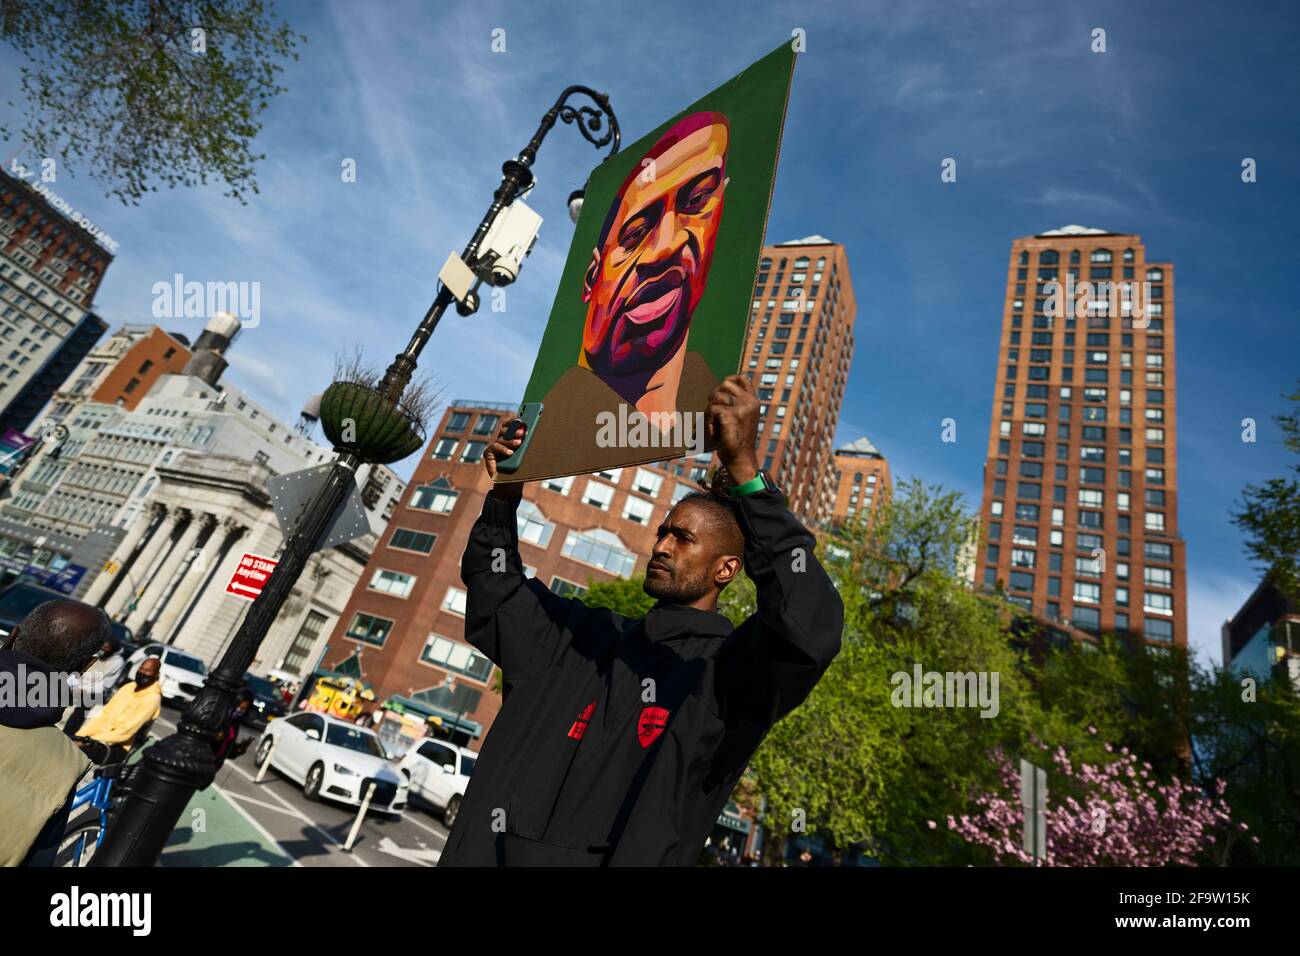 New York, New York, USA 20 April 2021.  Moments after former Minneapolis police officer Derek Chauvin was convicted of murdering George Floyd, defund police activist holds portrait of Floyd in front of crowd in New York's Union Square. Stock Photo